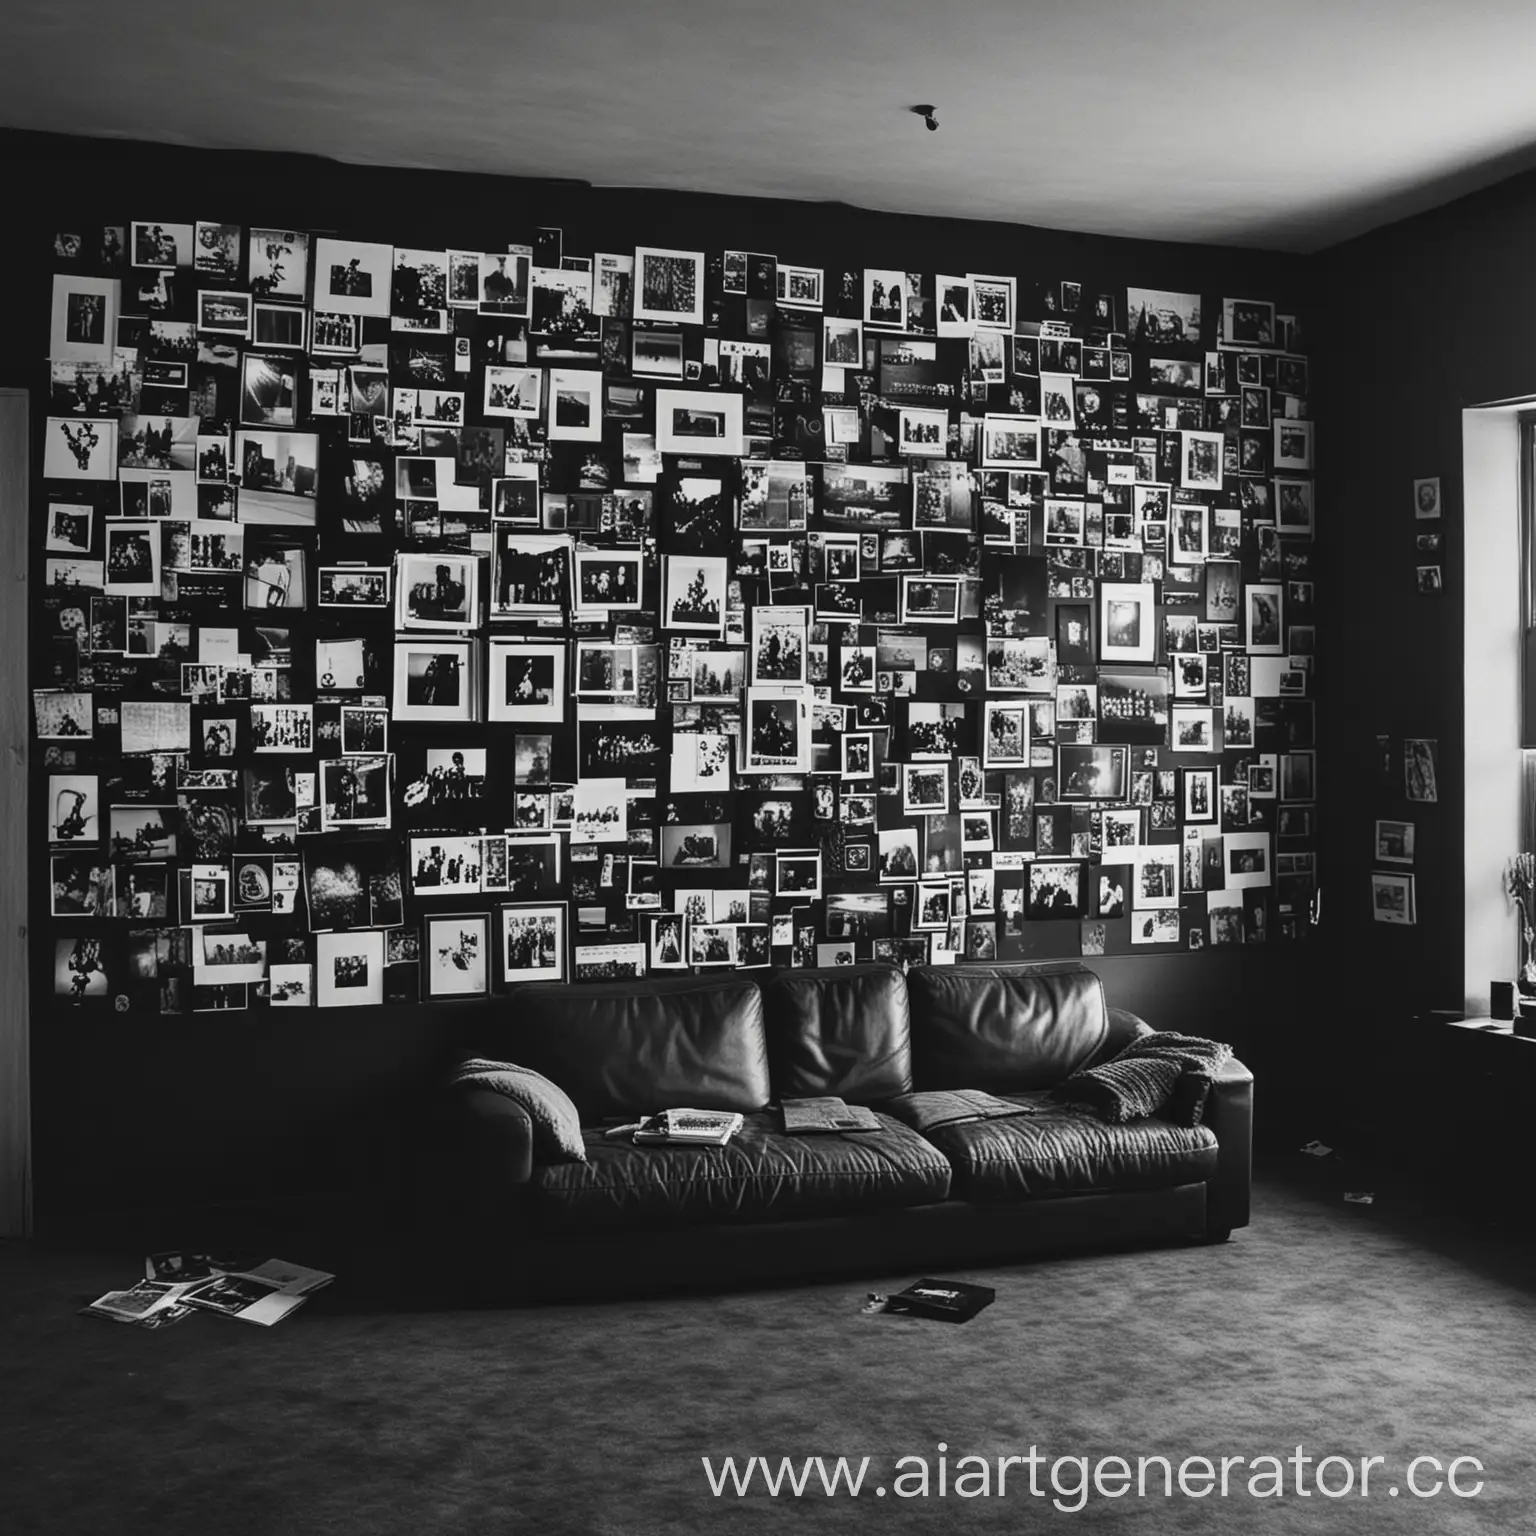 Listening-to-Alternative-Rock-in-a-Black-Room-with-Scattered-Photographs